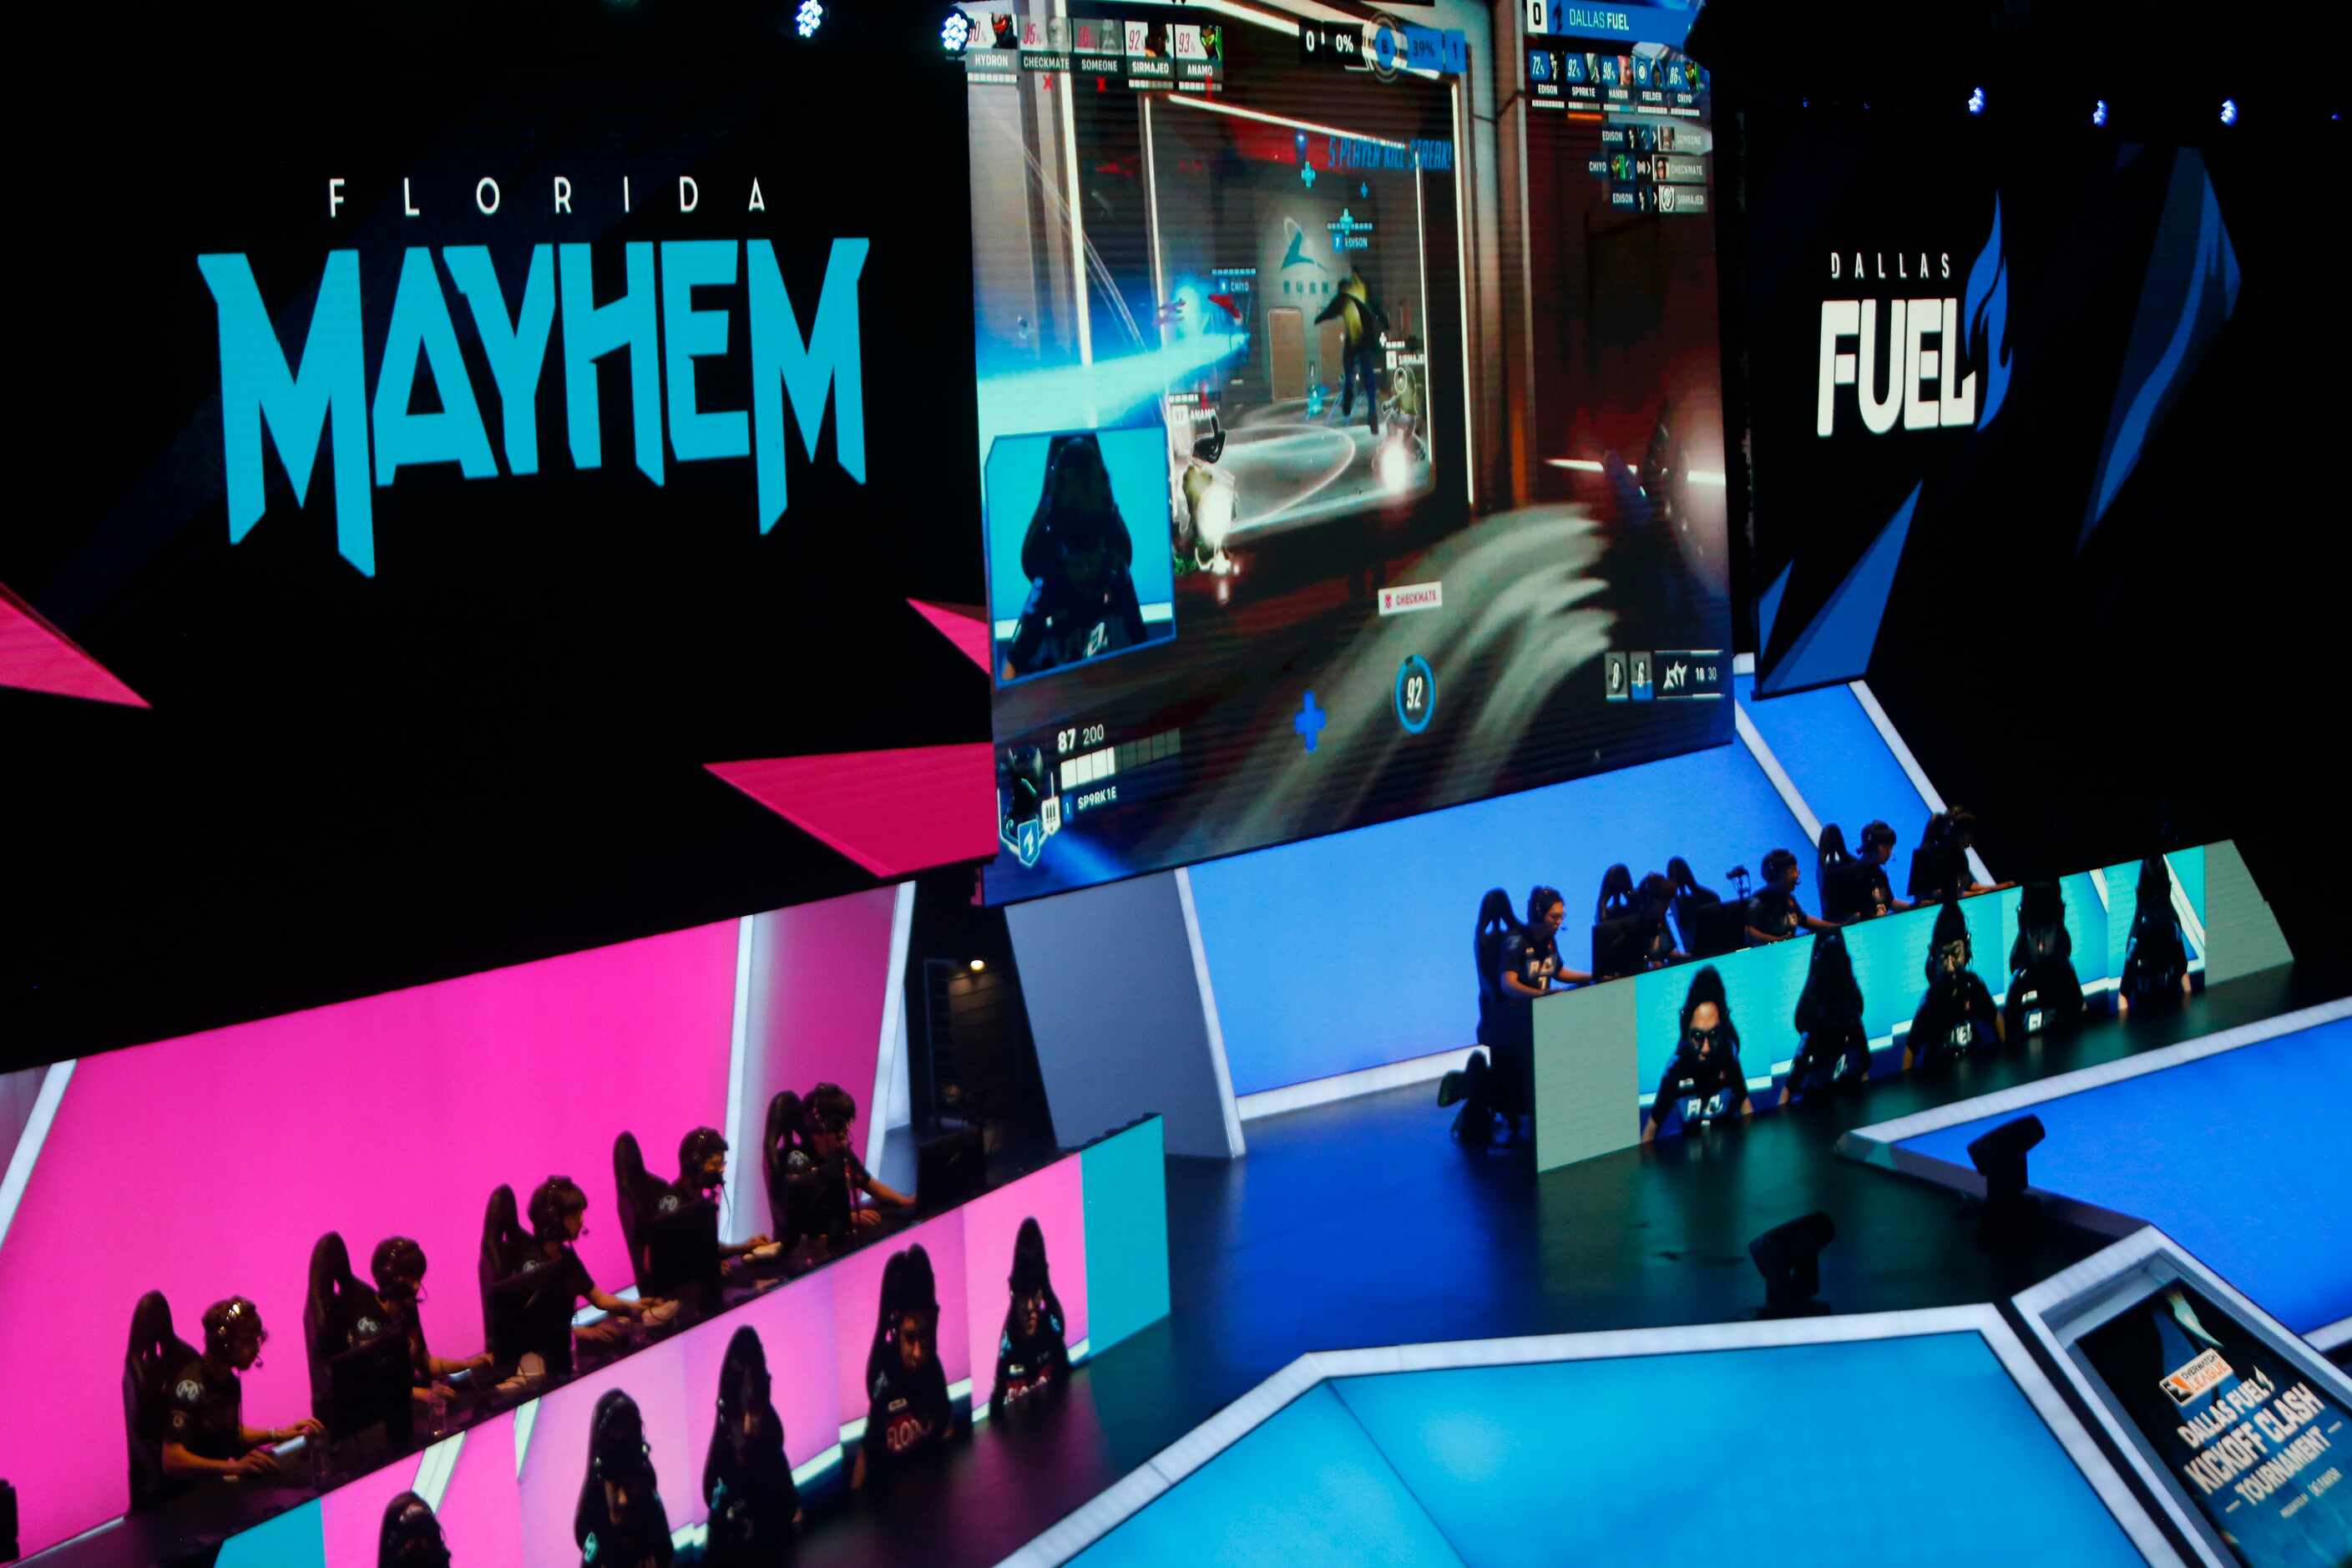 Dallas Fuel compete against Florida Mayhem en route to their victory in the first mat...